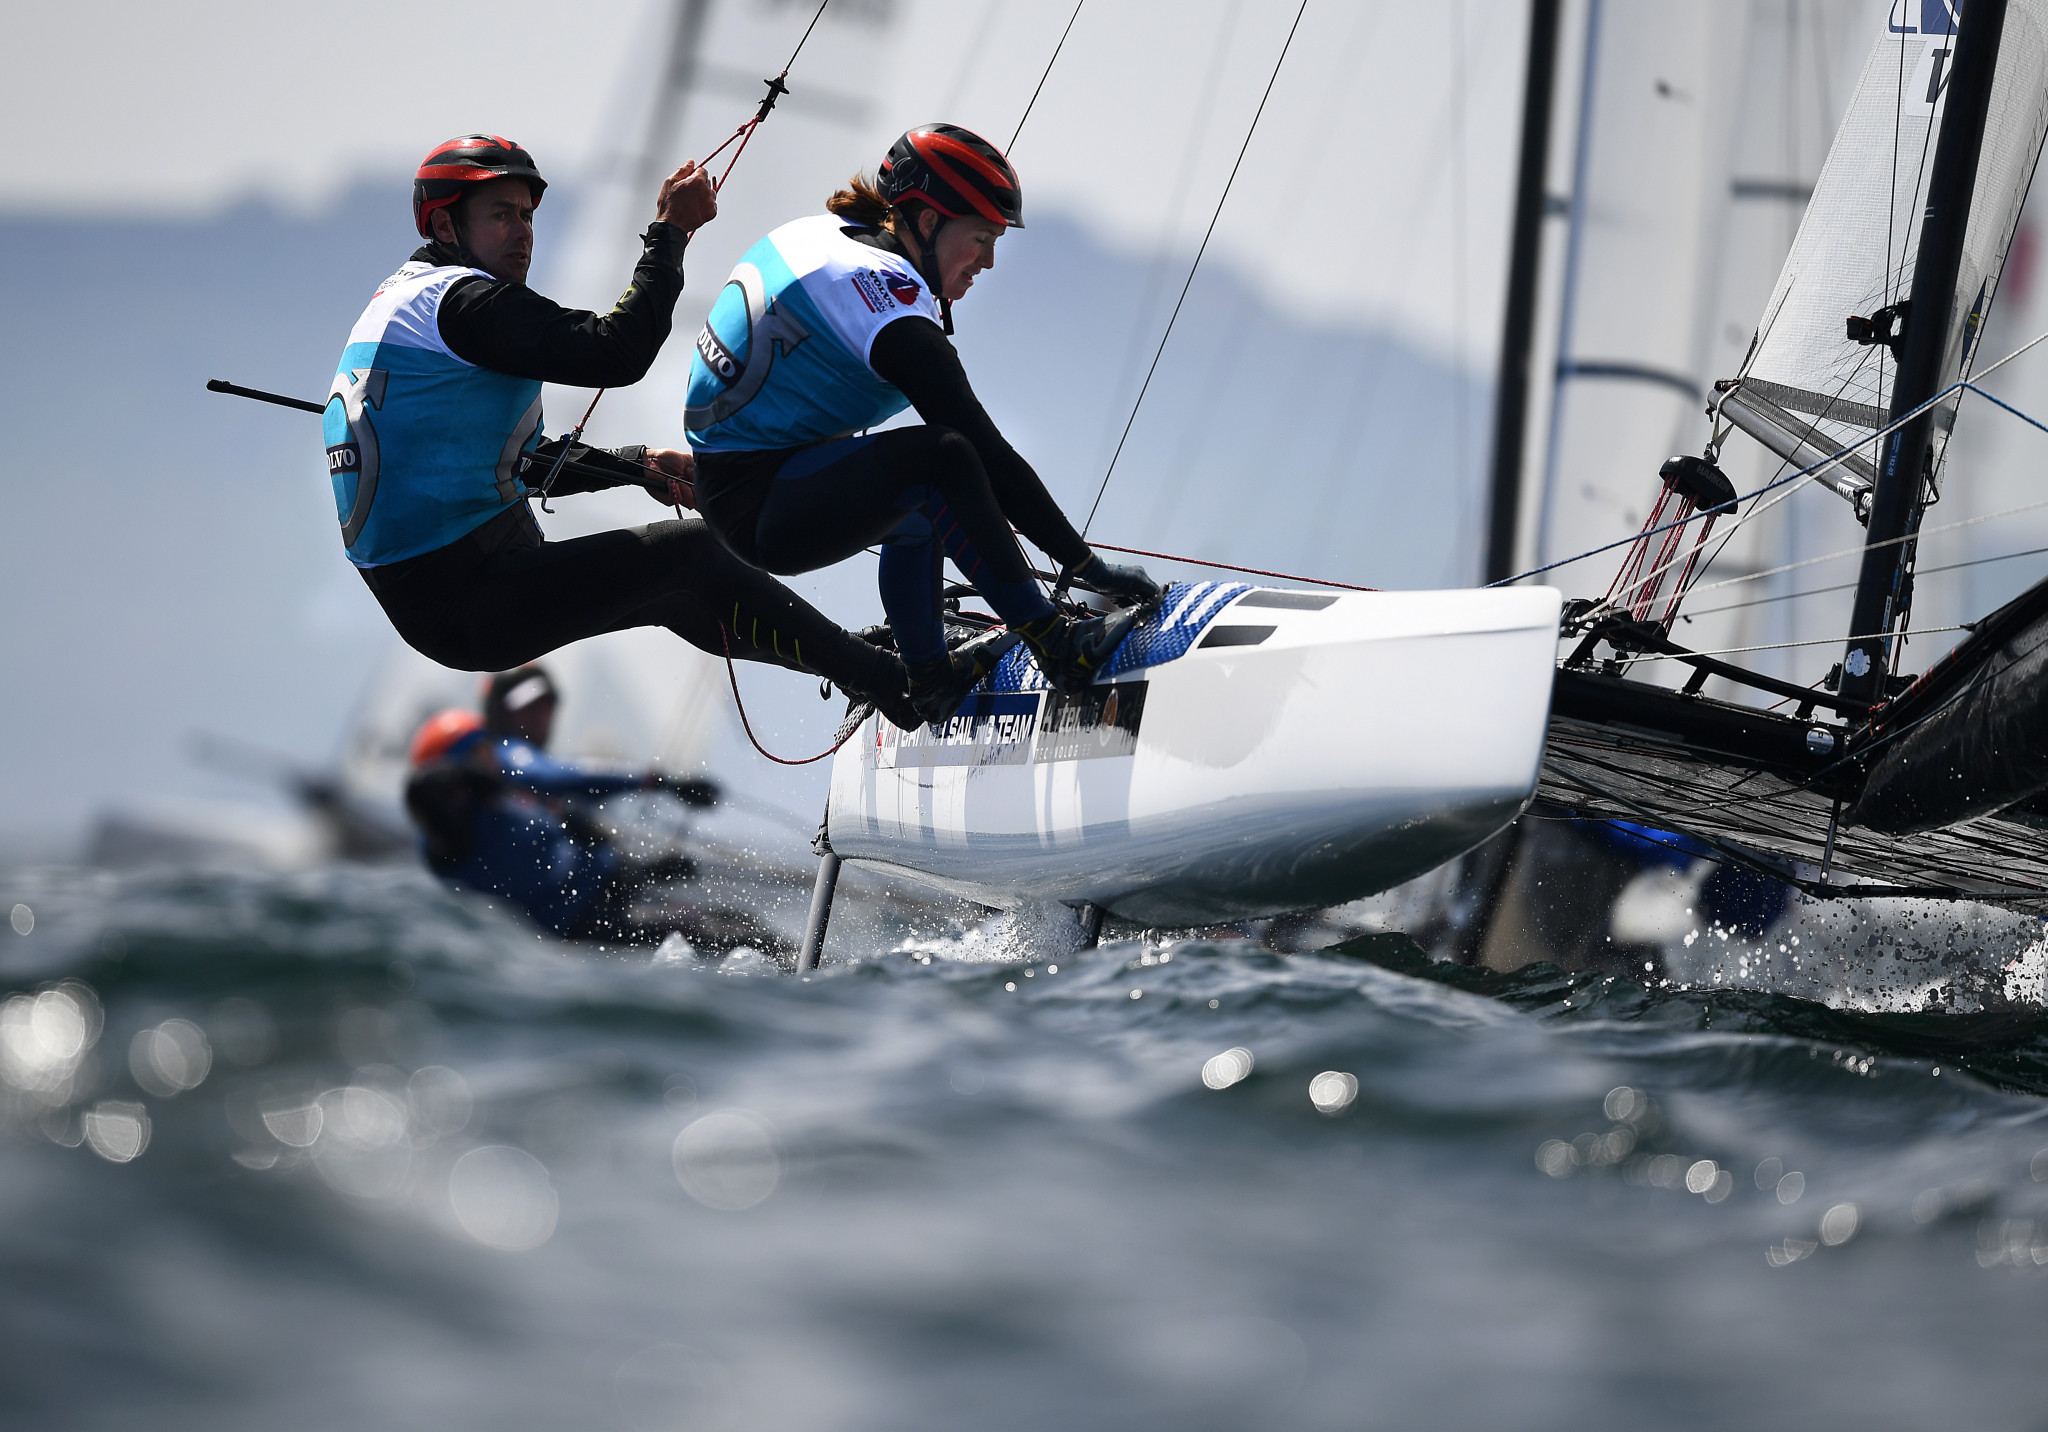 Great Britain's John Gimson and Anna Burnet have taken the lead in the Nacra 17 ©Getty Images